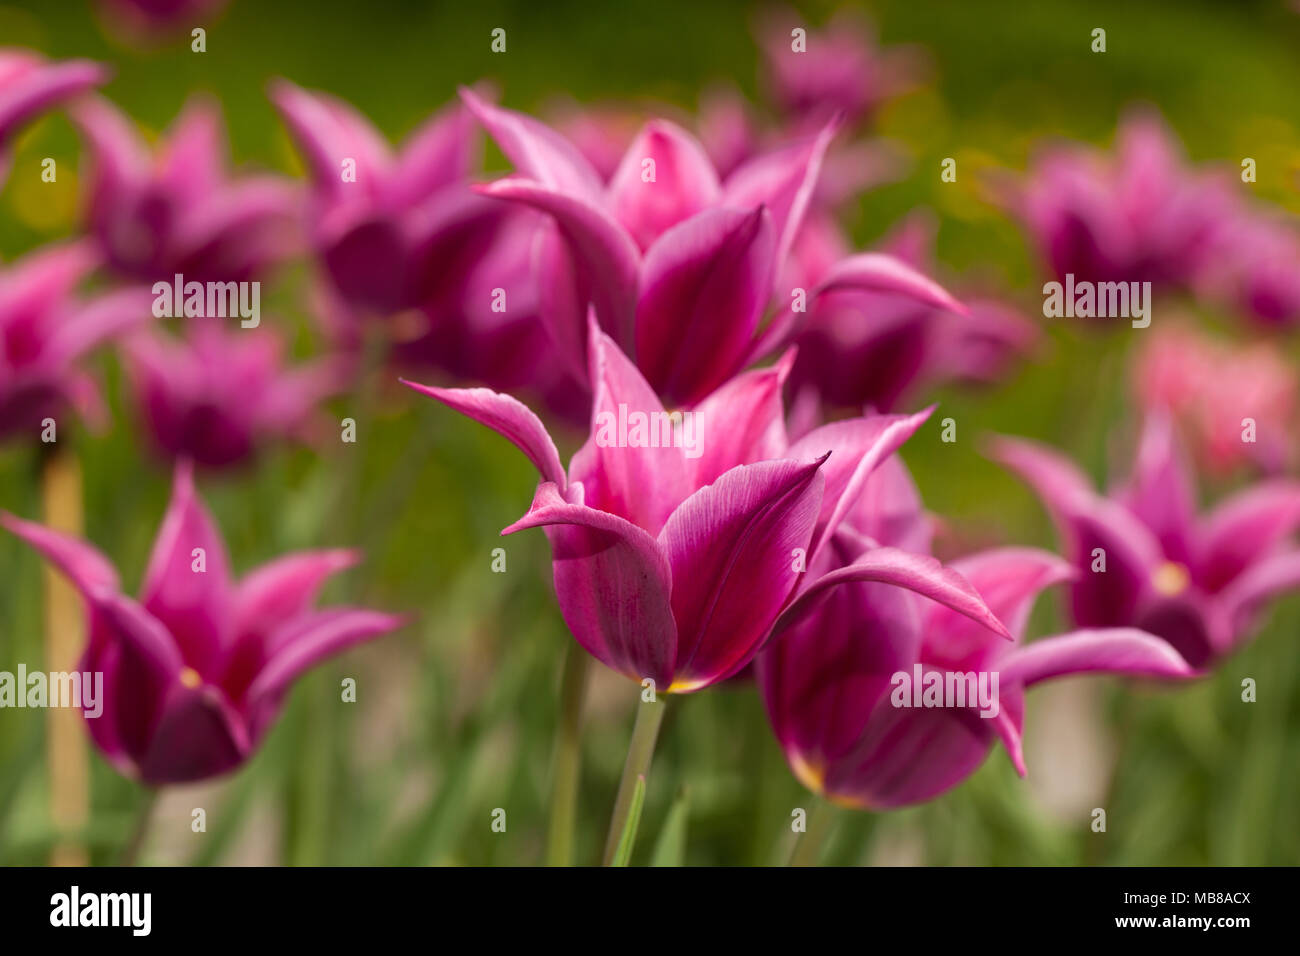 'Maytime' Lily Flowered Tulip (Tulipa Gesneriana, Liljetulpan) Banque D'Images